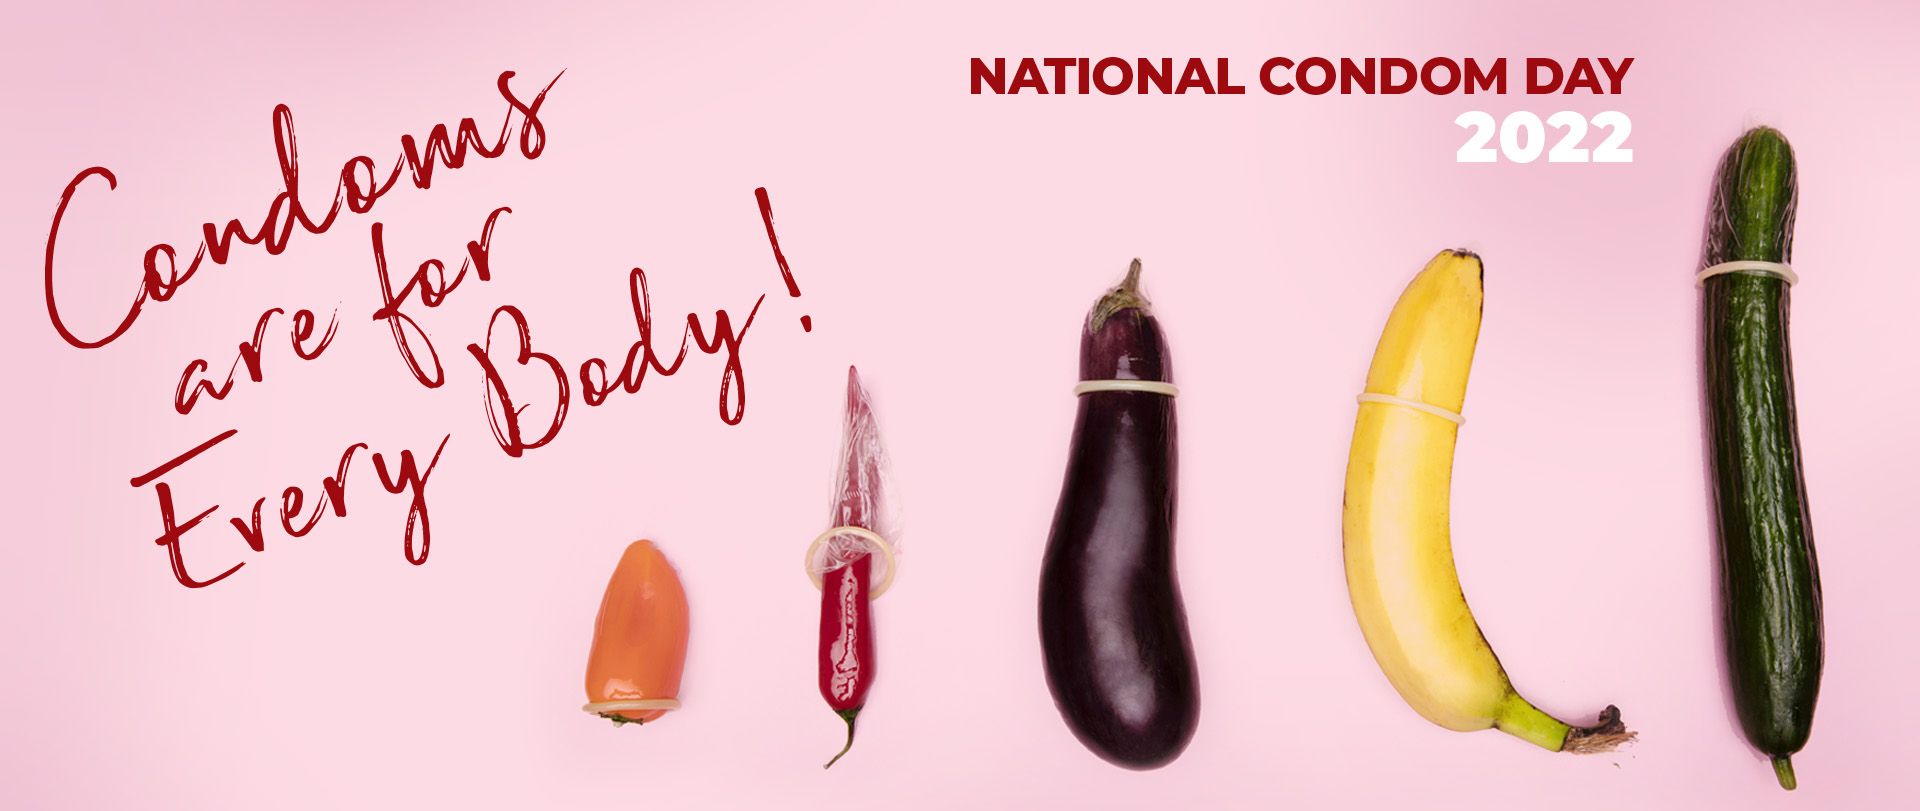 Various sized fruit and vegetables with Condoms against a pink background and the words 'Condoms are for Every Body".